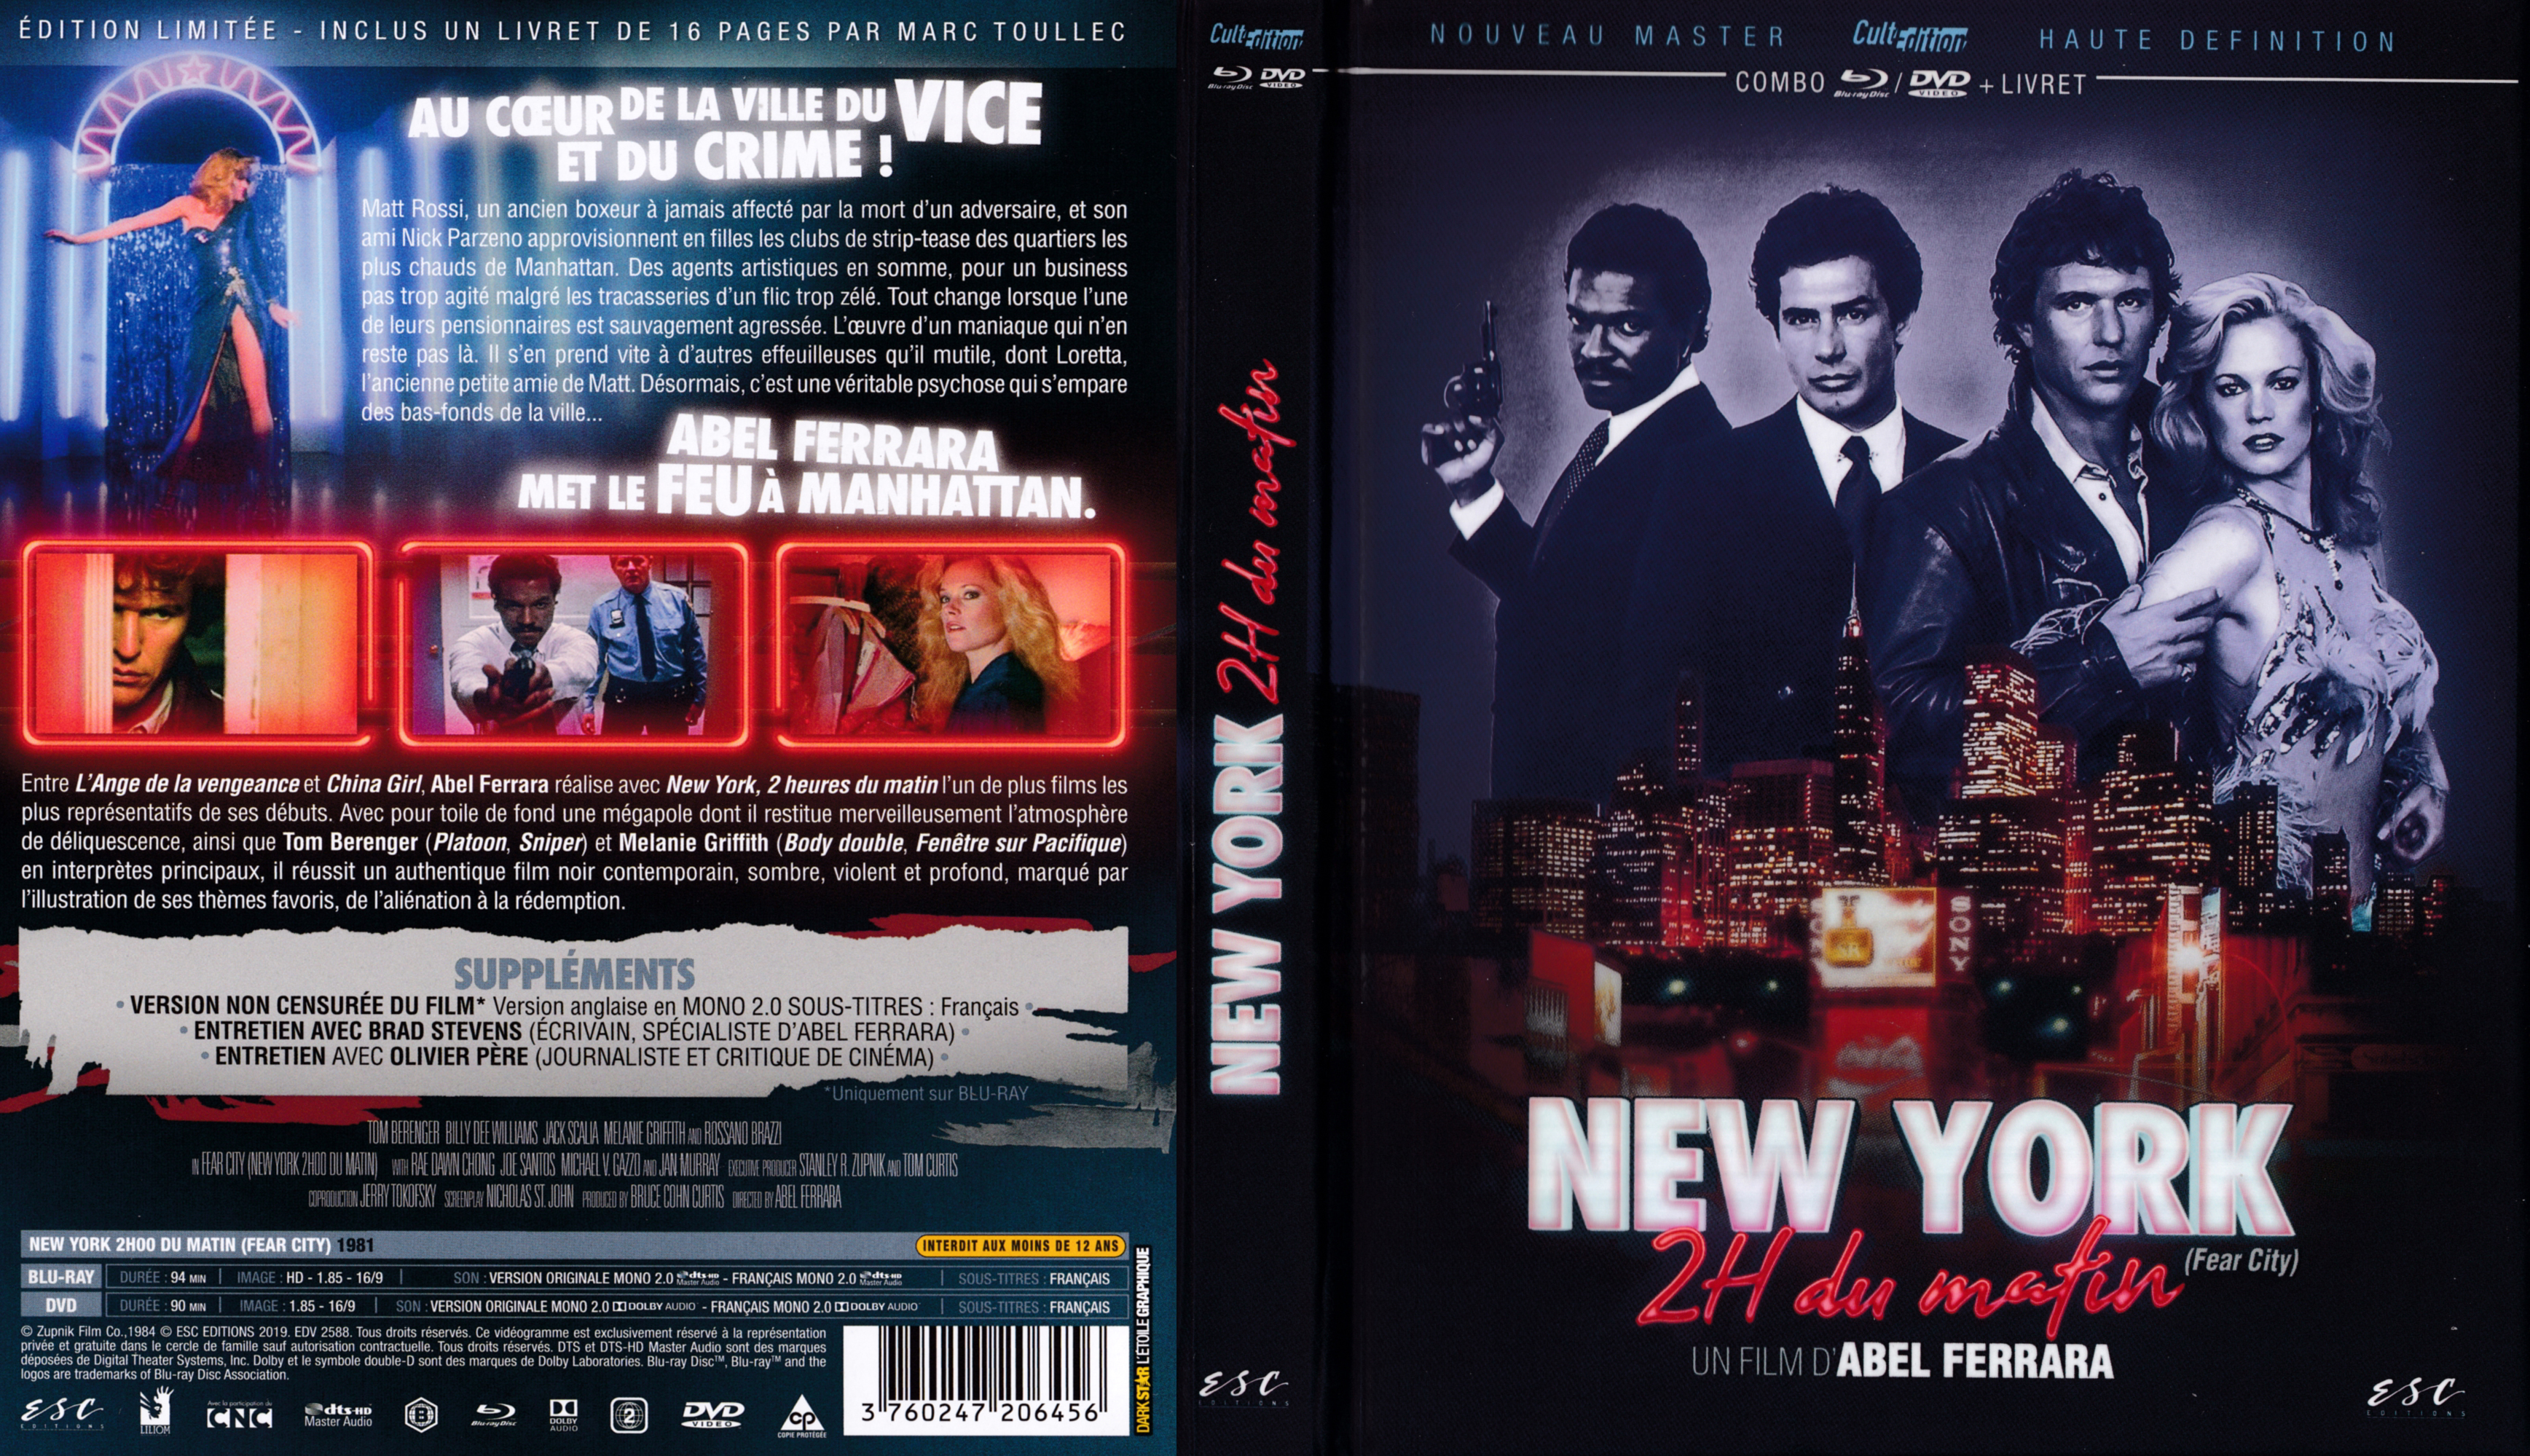 Jaquette DVD New York 2 Heures du matin (BLU-RAY) v2